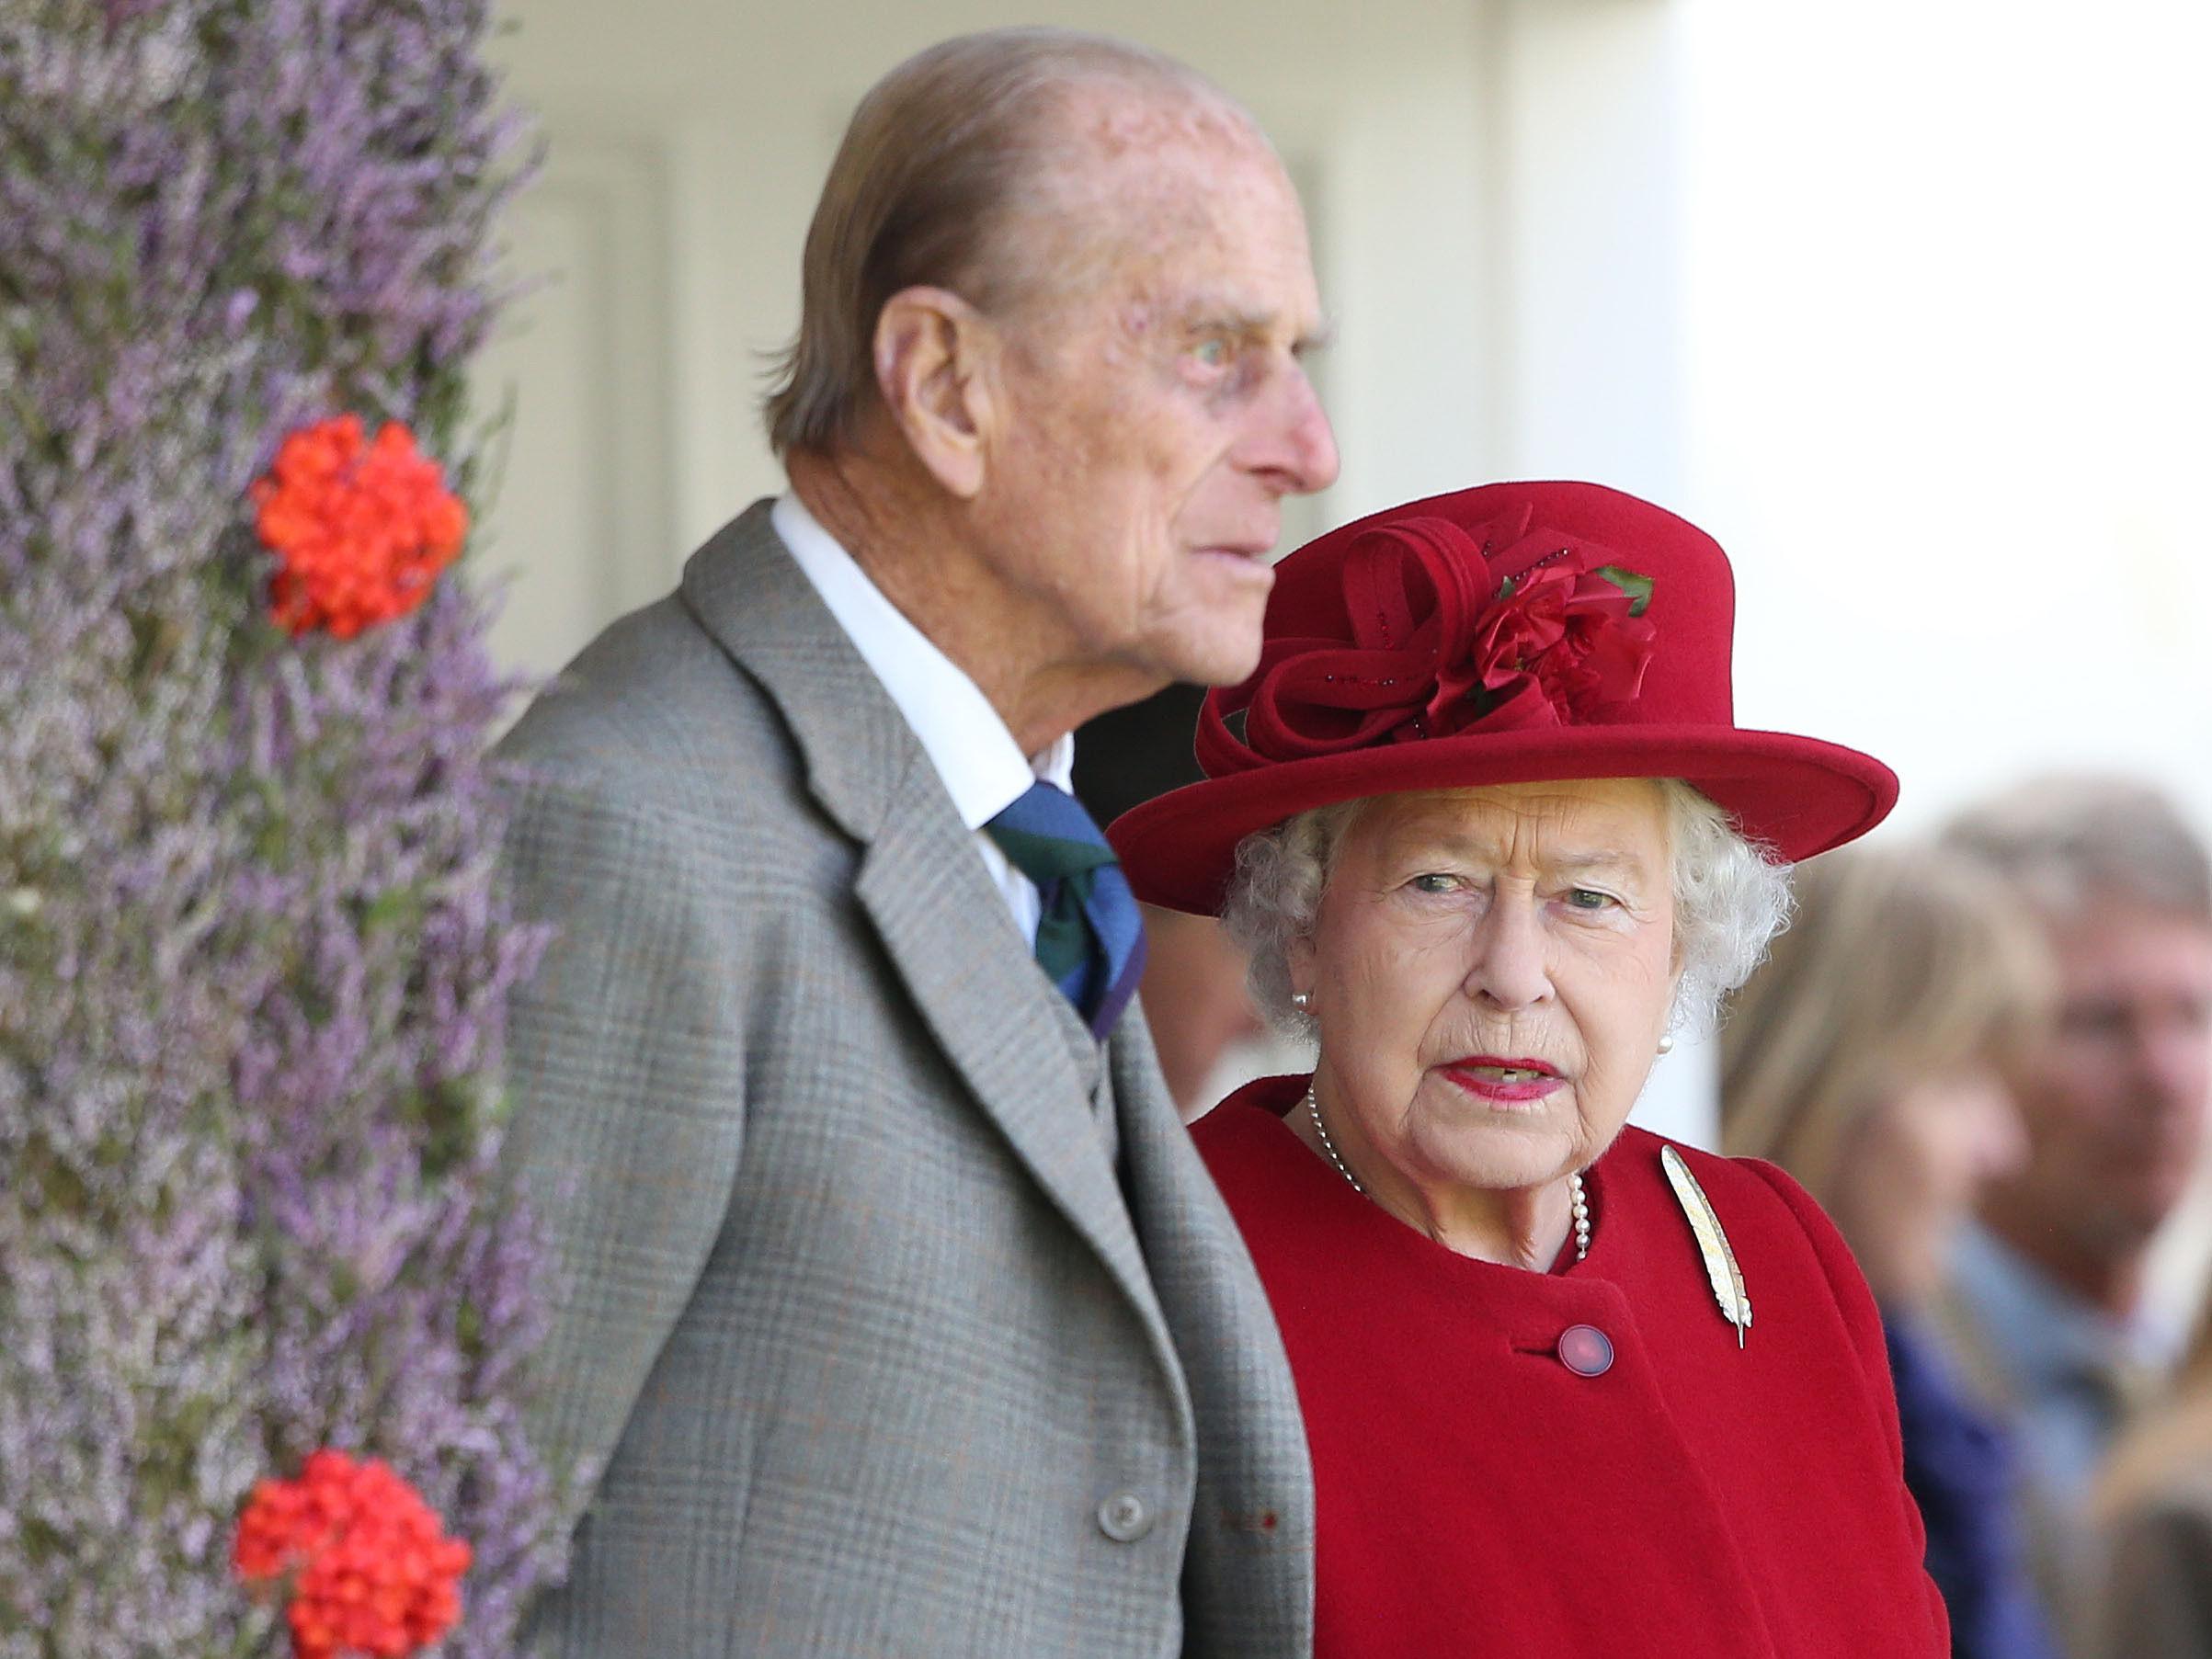 The Duke of Edinburgh and Queen Elizabeth II during the Braemar Royal Highland Gathering, held a short distance from the Balmoral estate in Aberdeenshire